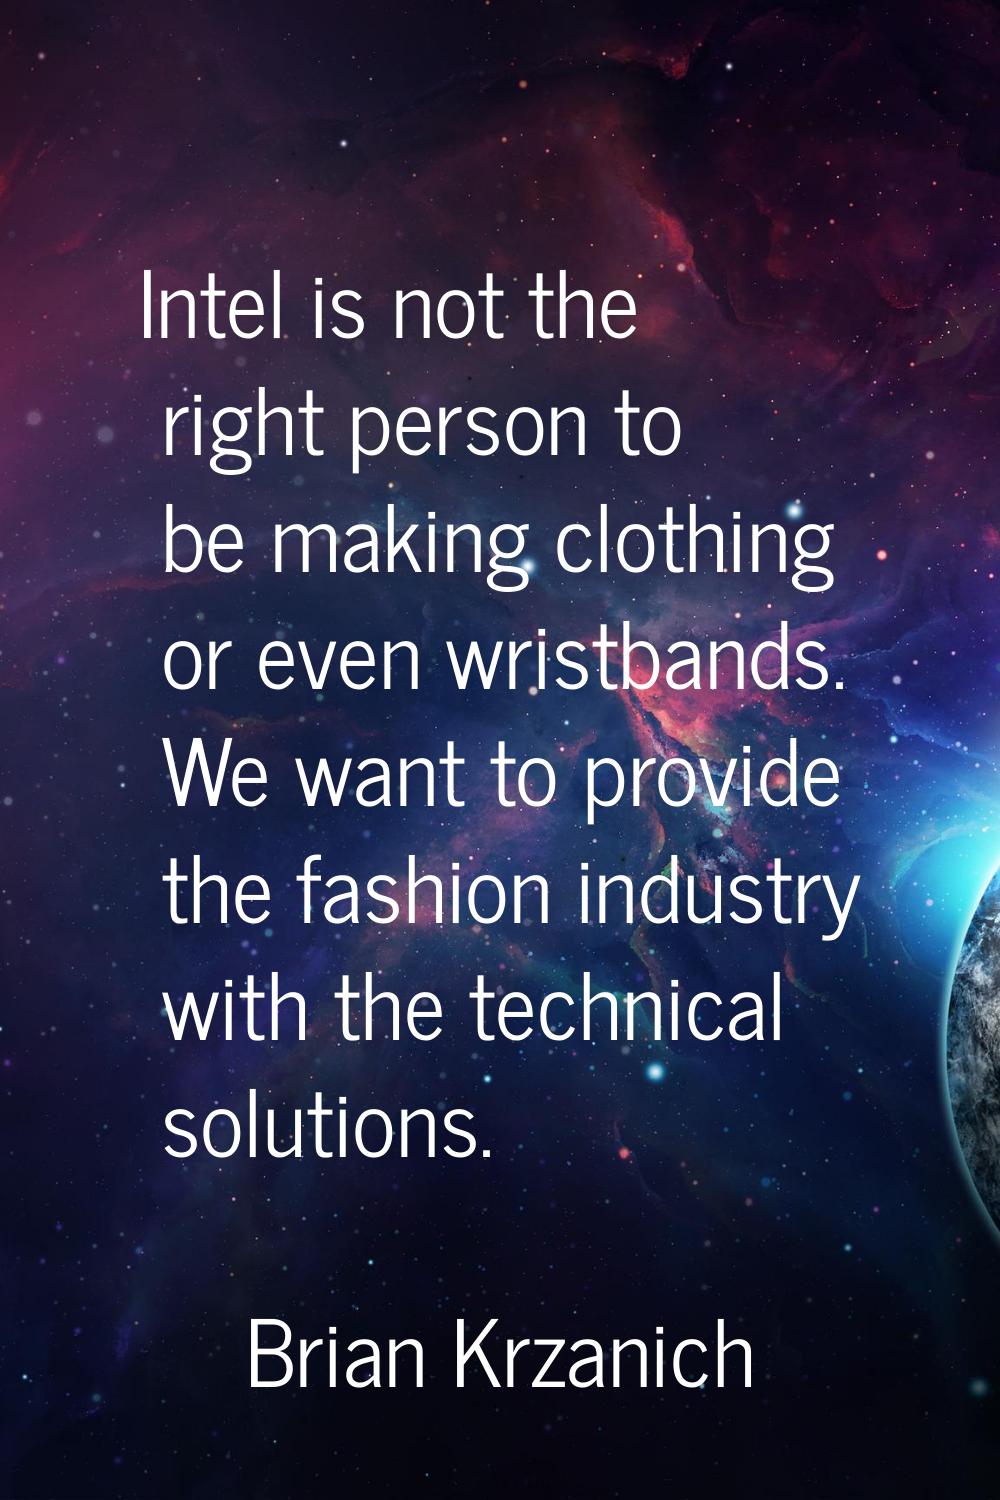 Intel is not the right person to be making clothing or even wristbands. We want to provide the fash